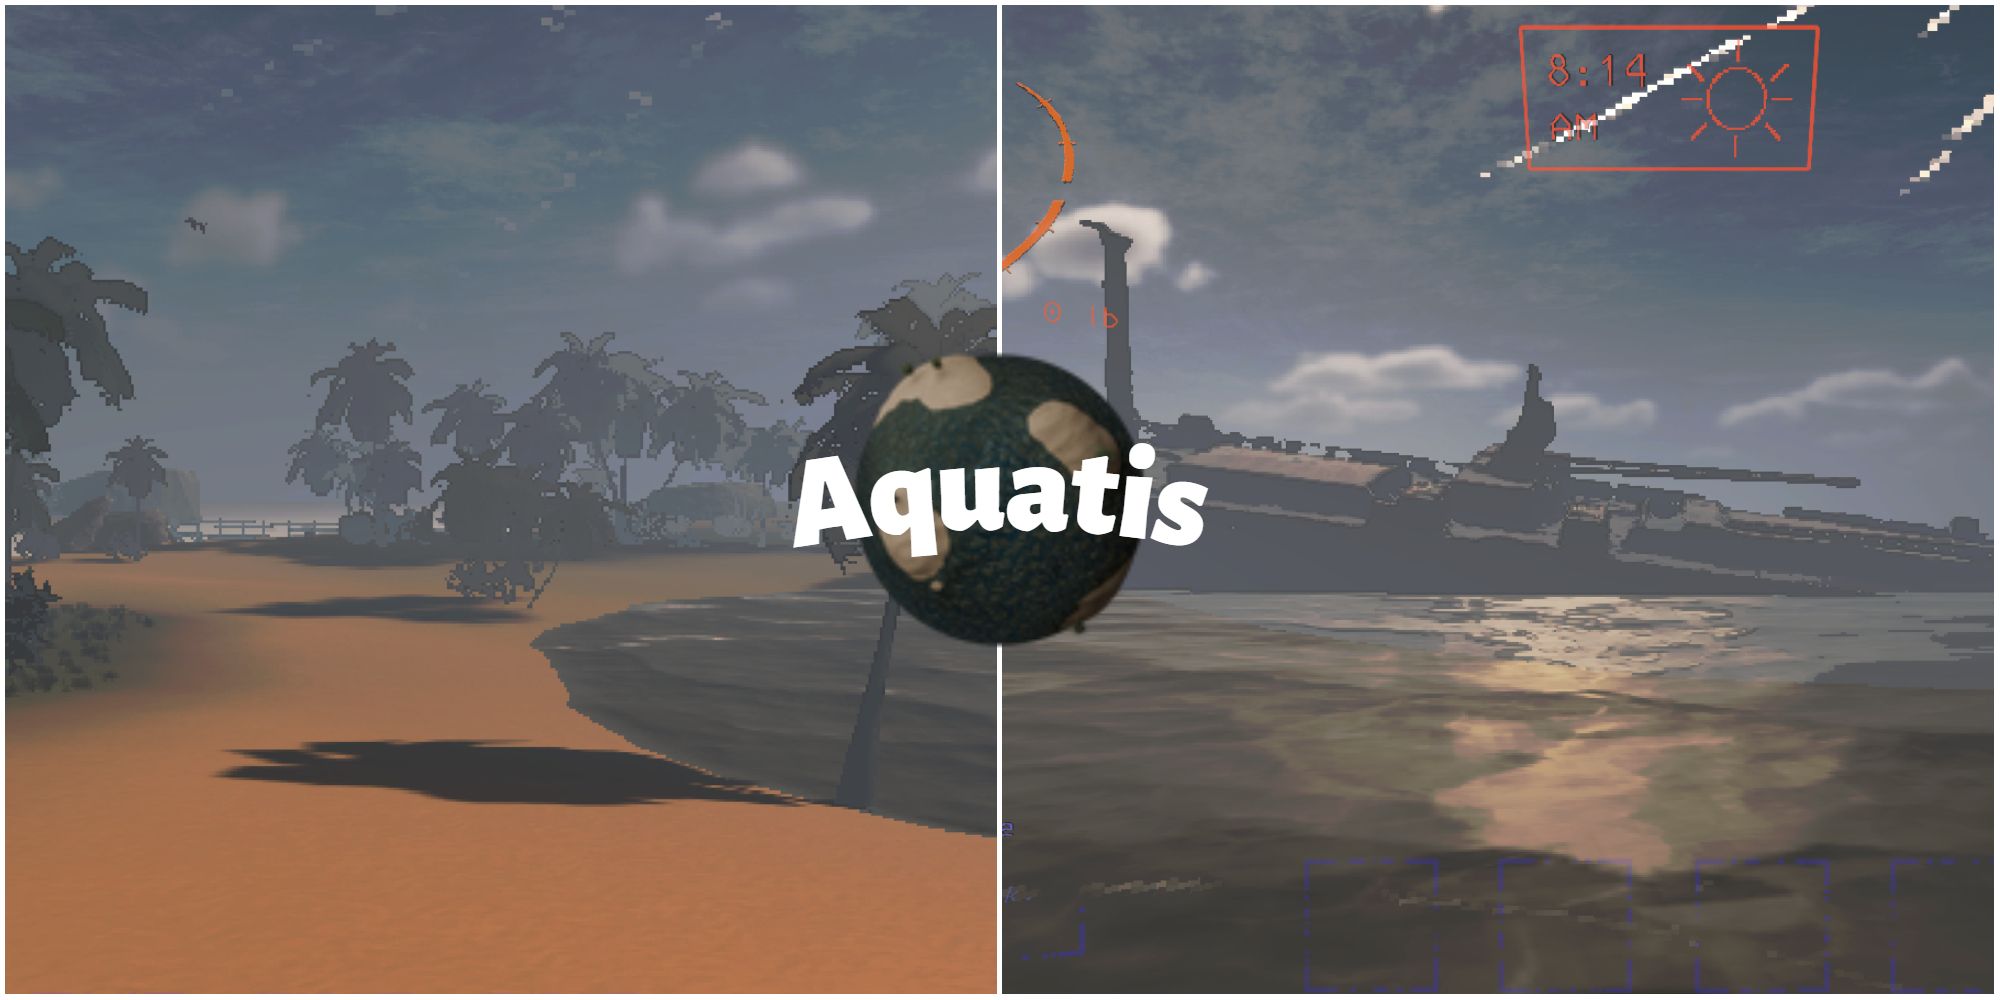 Screenshots of the Aquatis modded moon, featuring a beachy world with a shipwreck